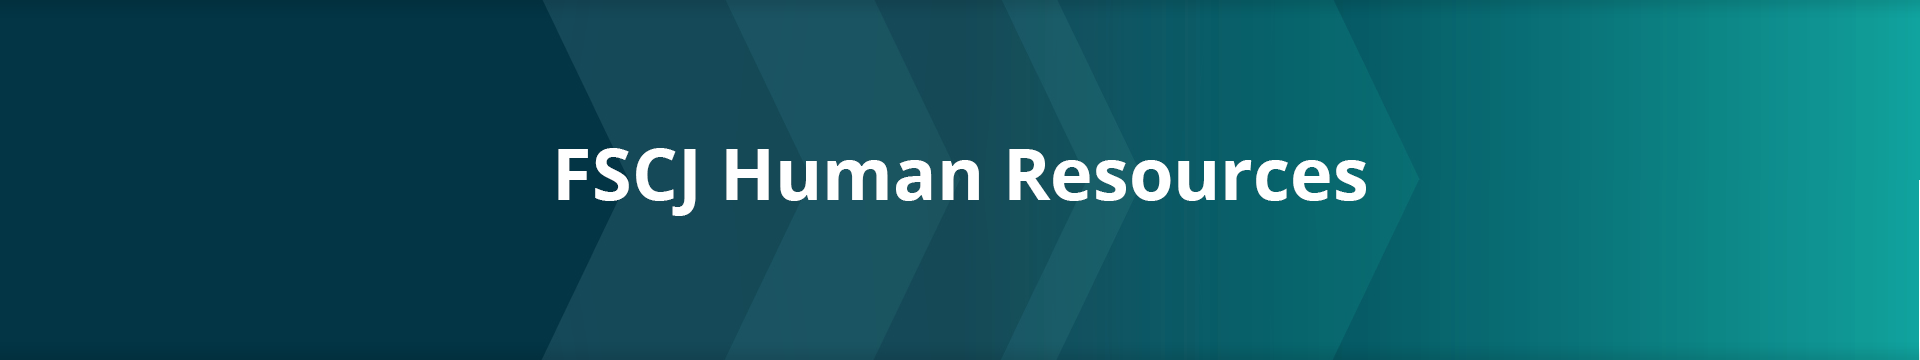 Human Resources Home Banner